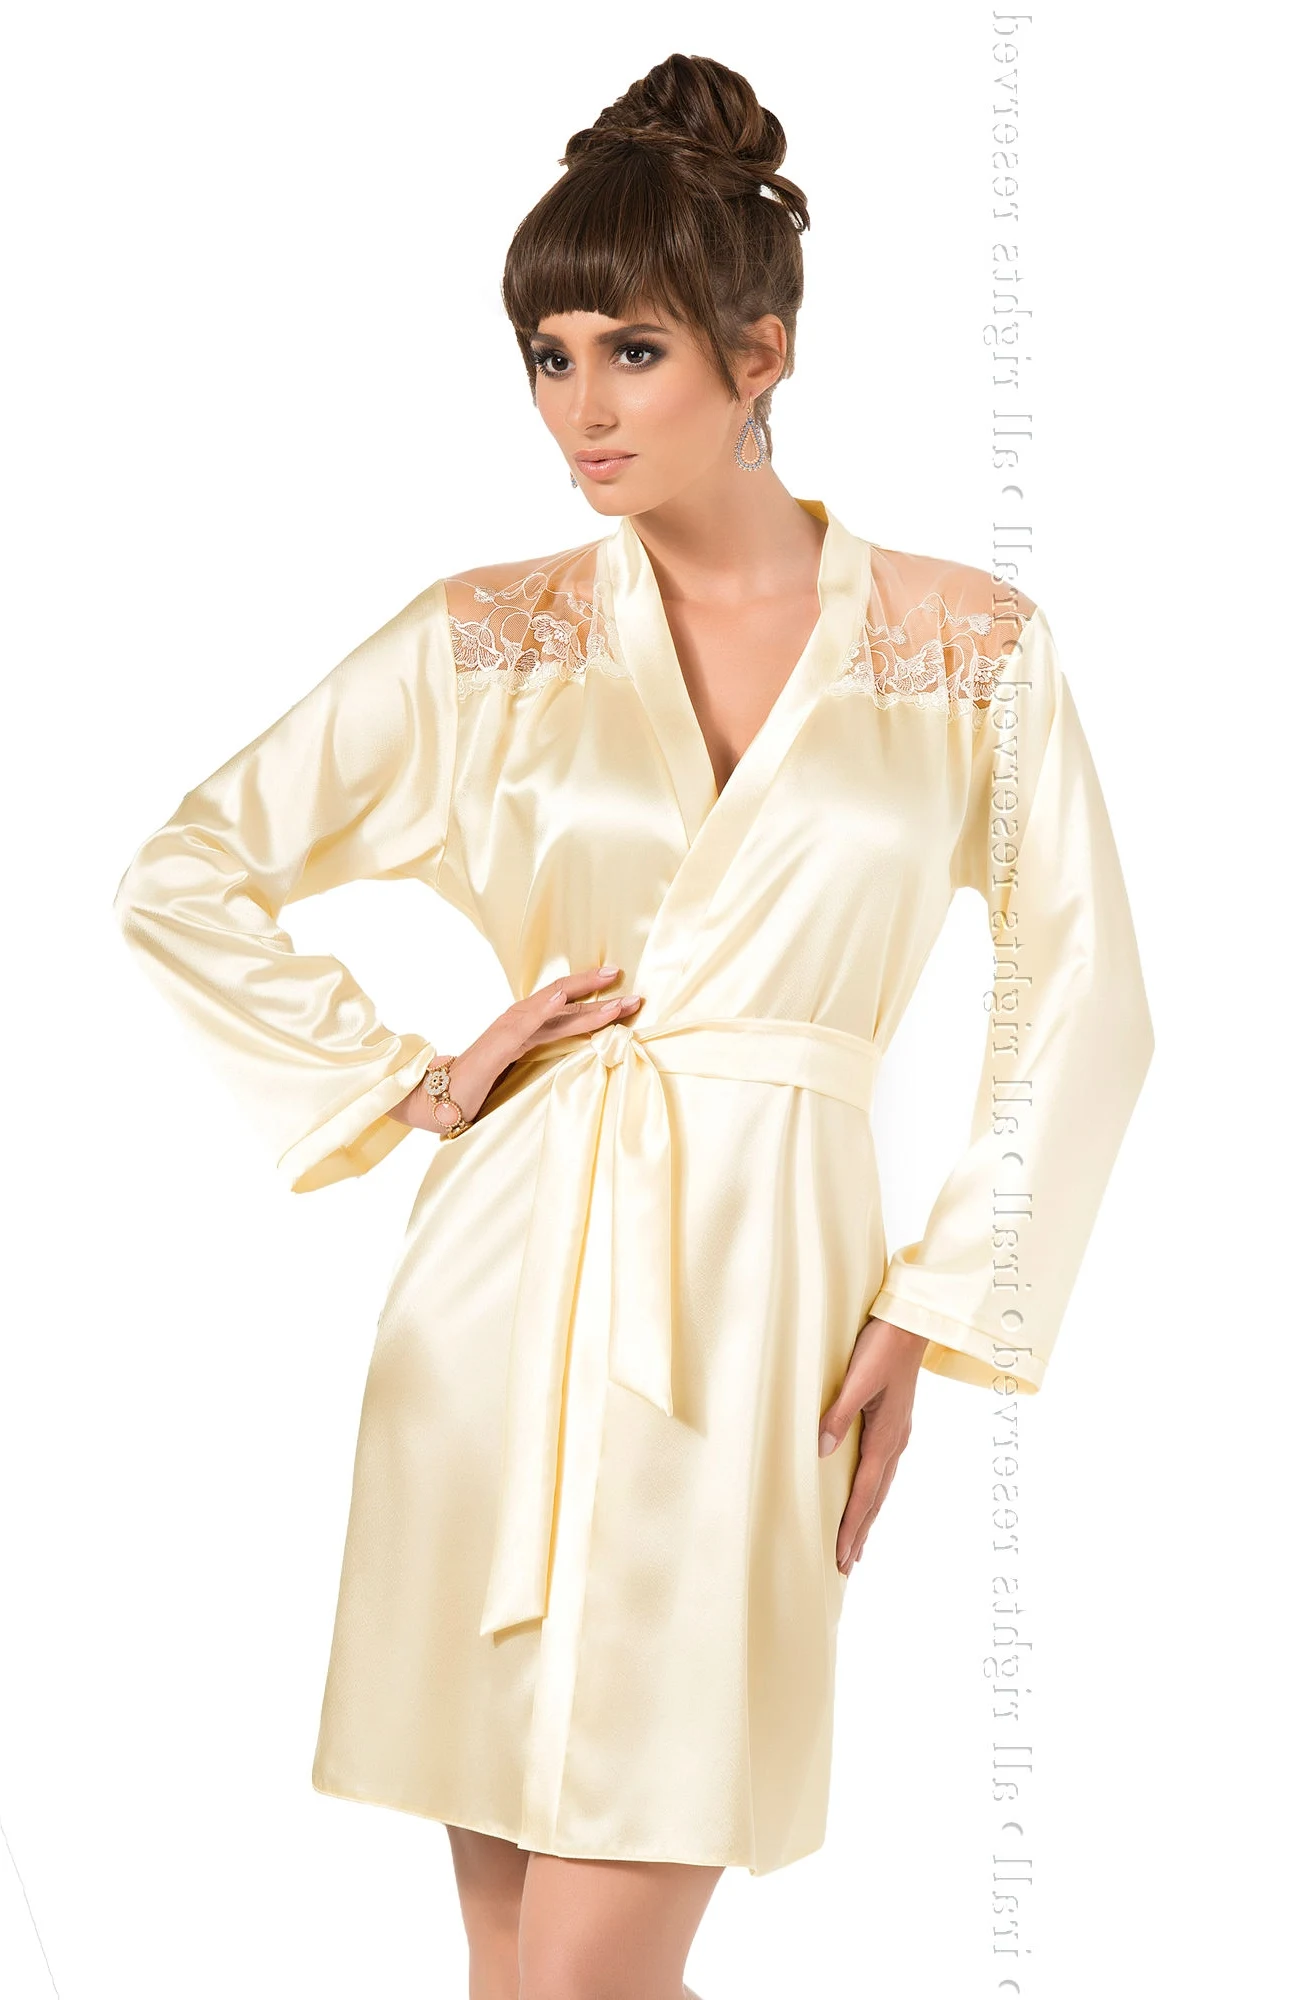 Irall Satin Cream Dressing Gown with Floral Mesh Panels